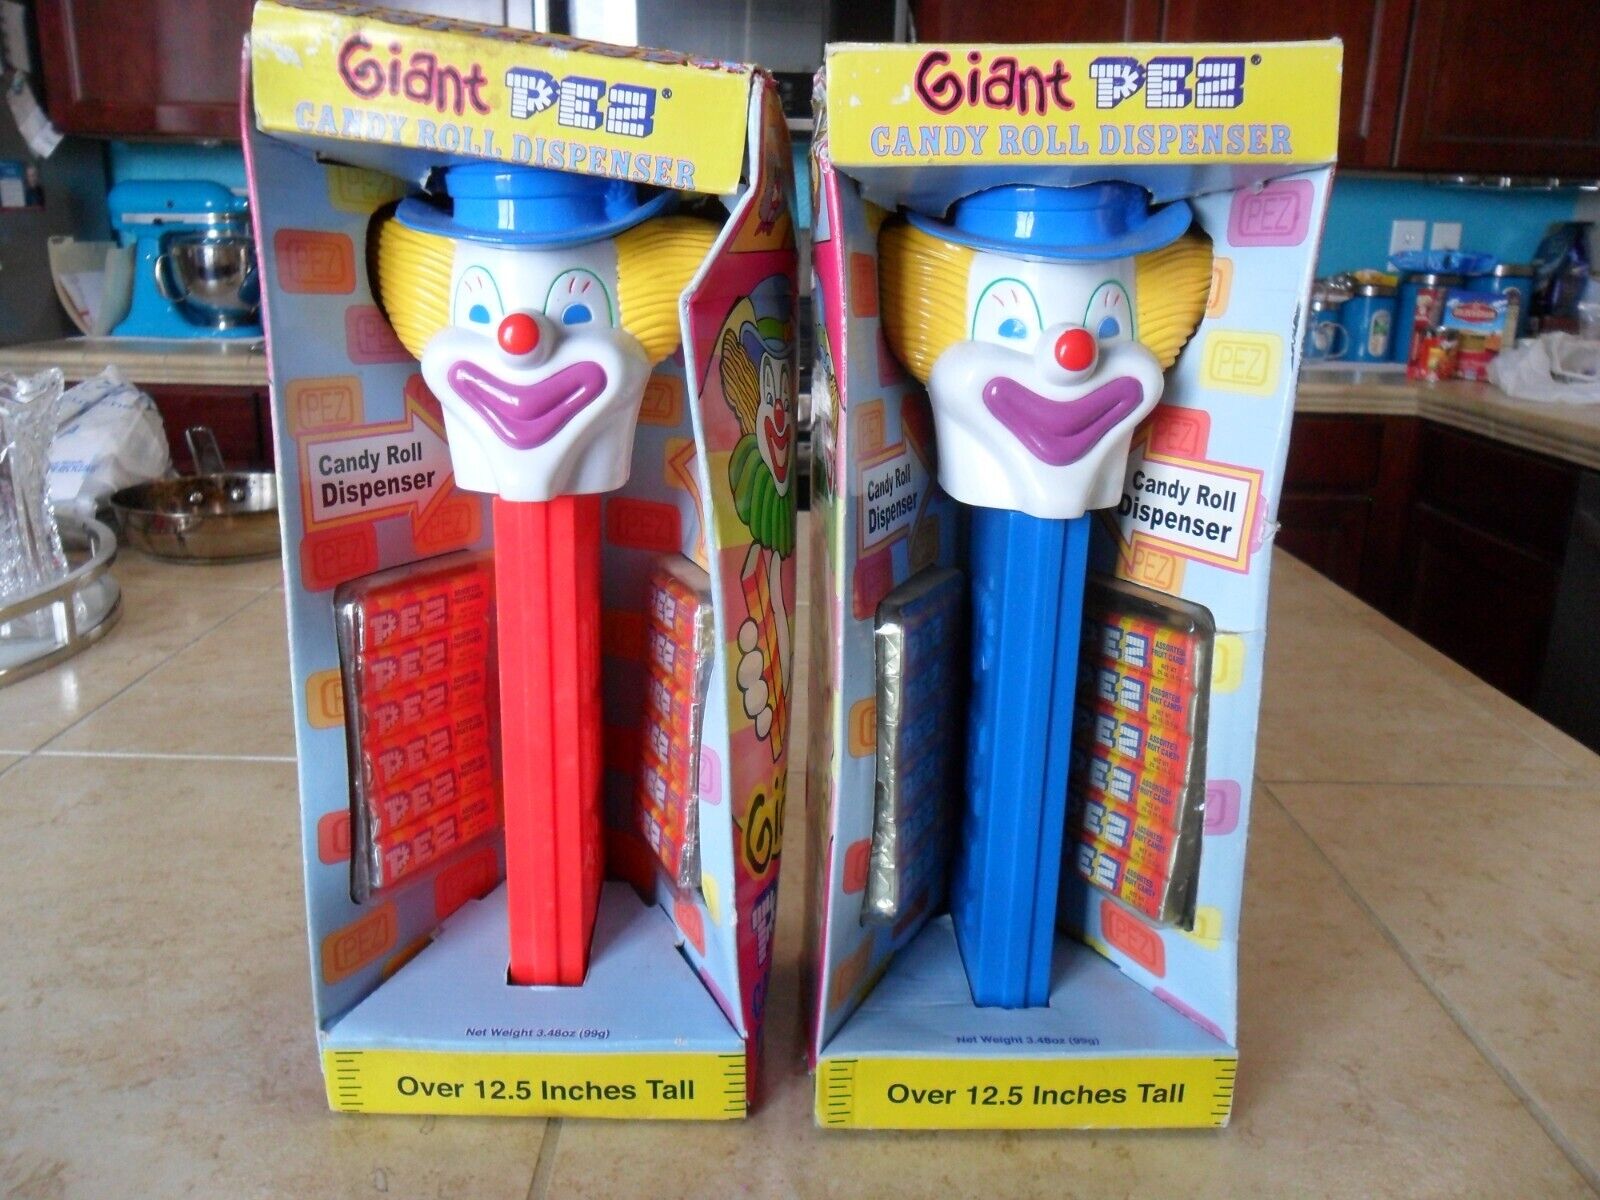 2 GIANT CLOWNS PEZ CANDY ROLL DISPENSERS BLUE&RED BODY IN ORIG BOX W/CANDY 1971?